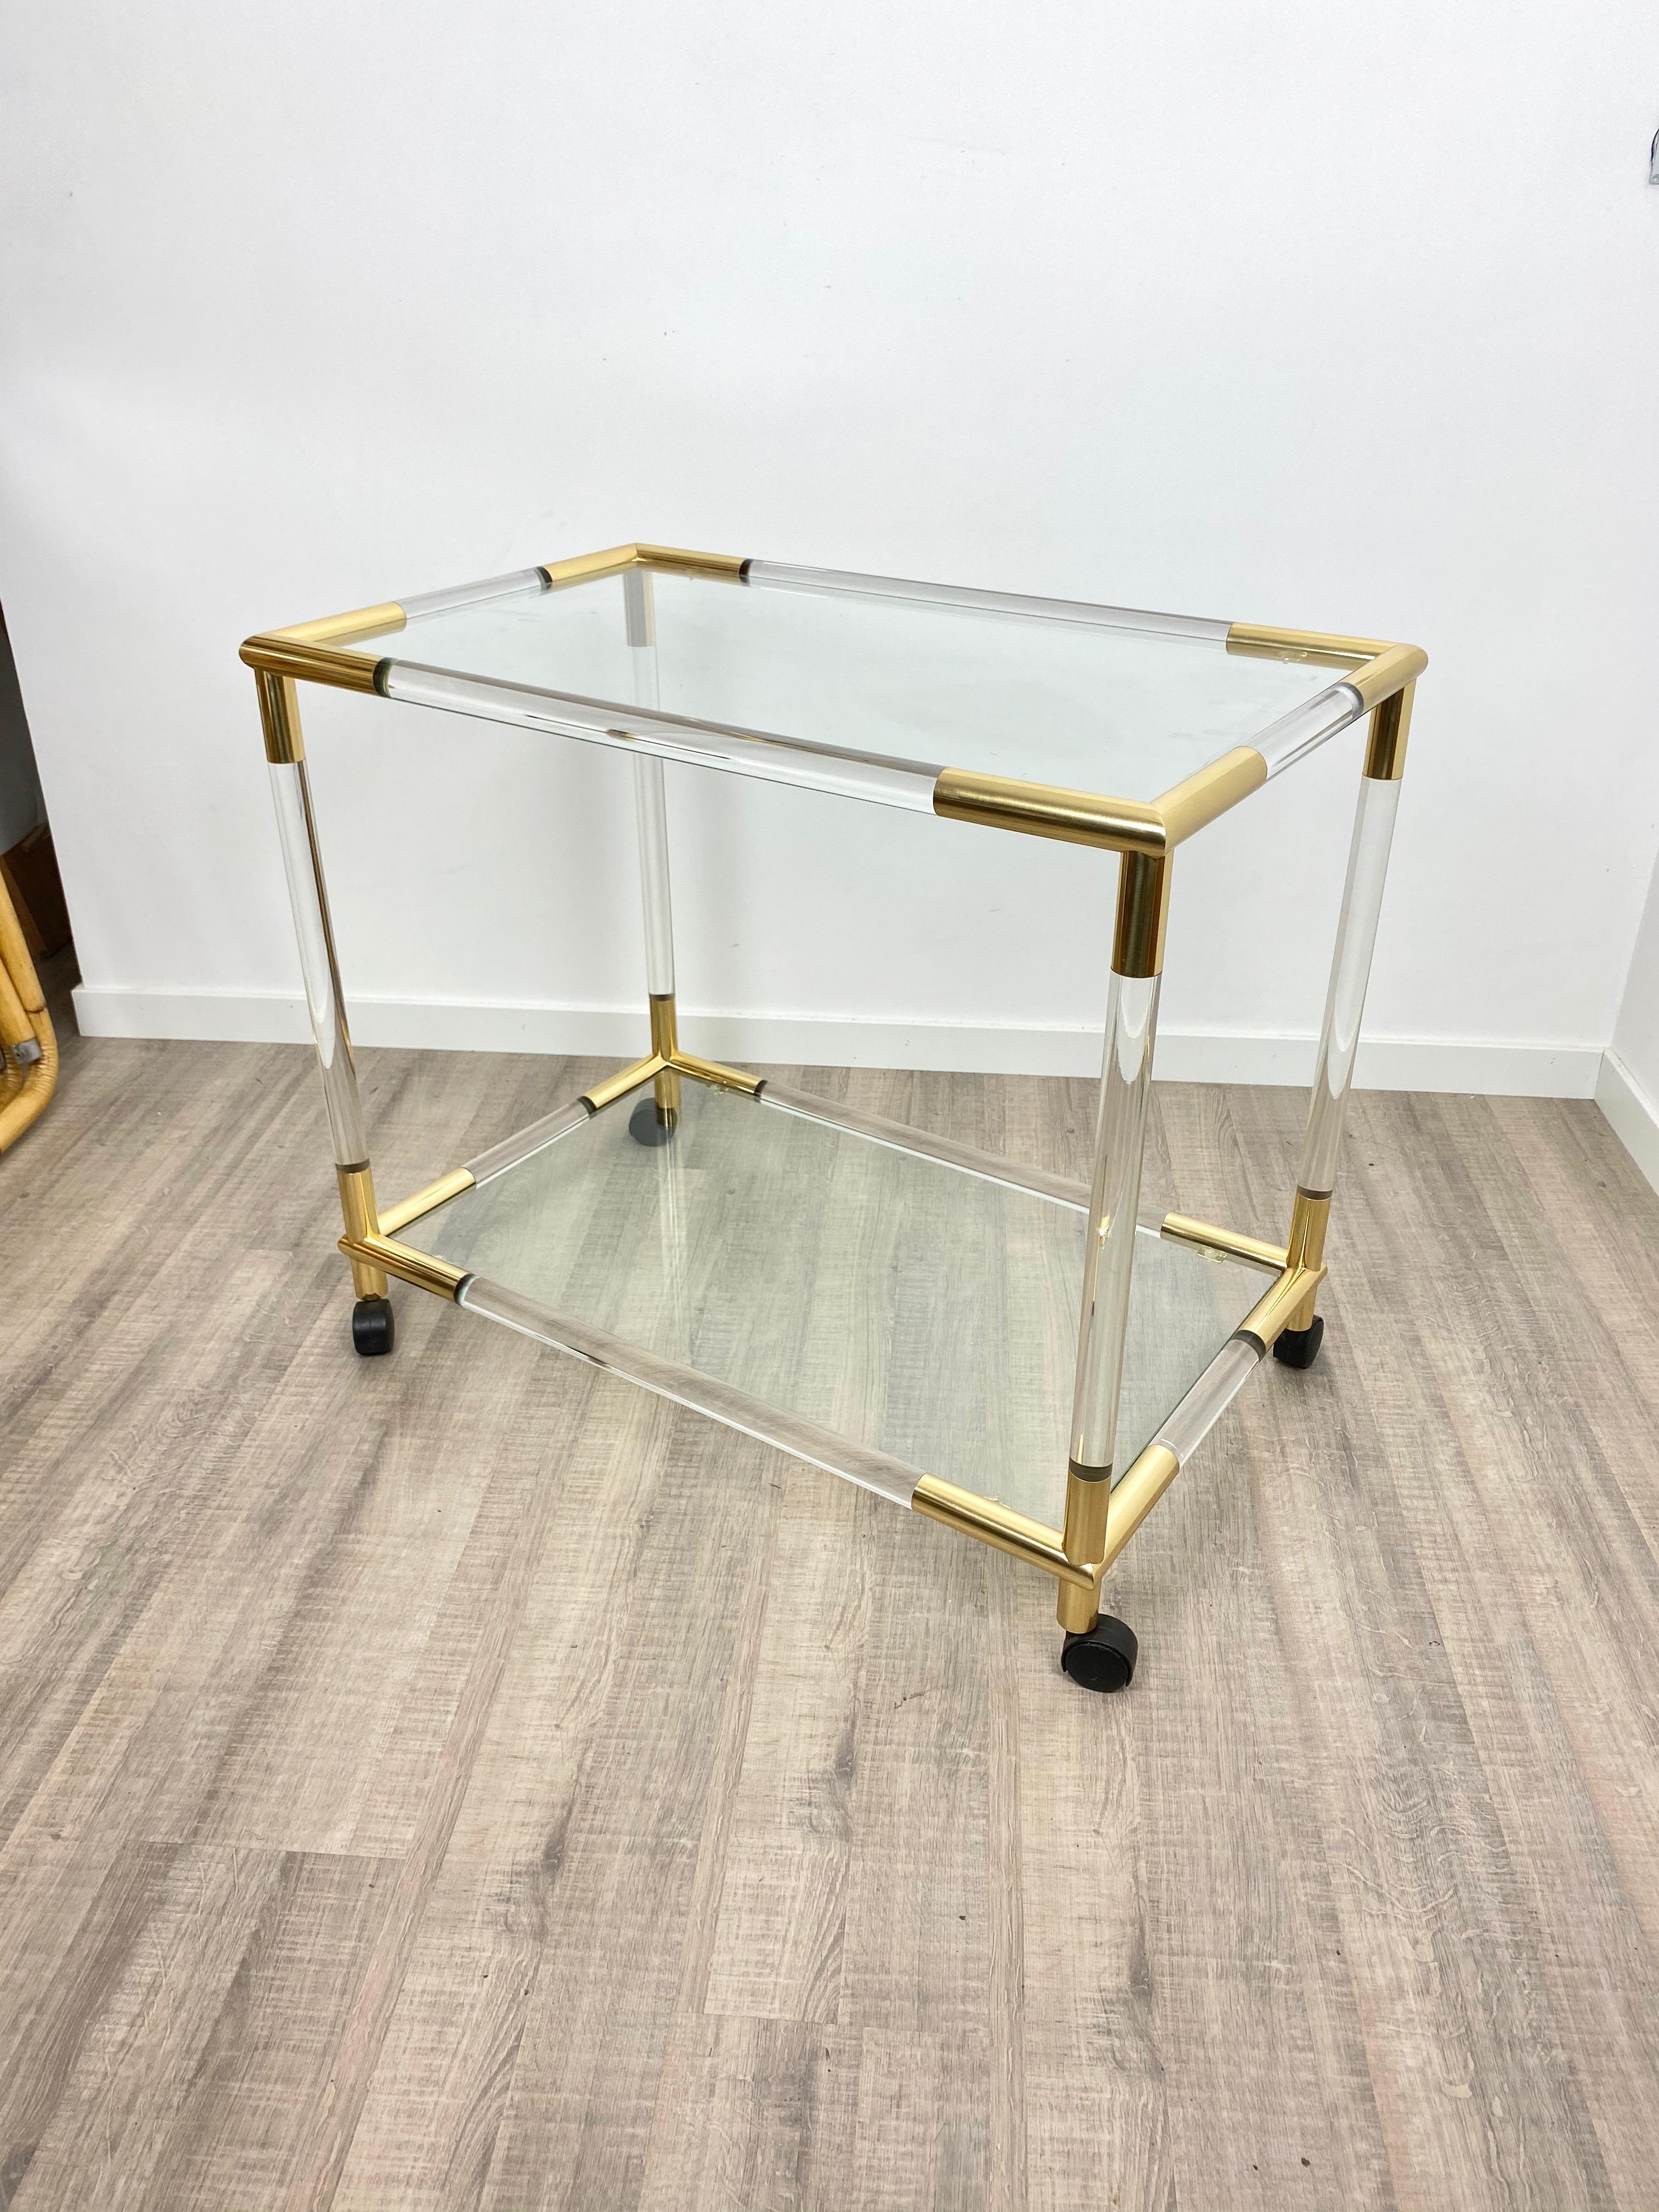 Bar serving cart trolley in Lucite structure and brass details with two glass shelves. Original from Italy, 1960s.